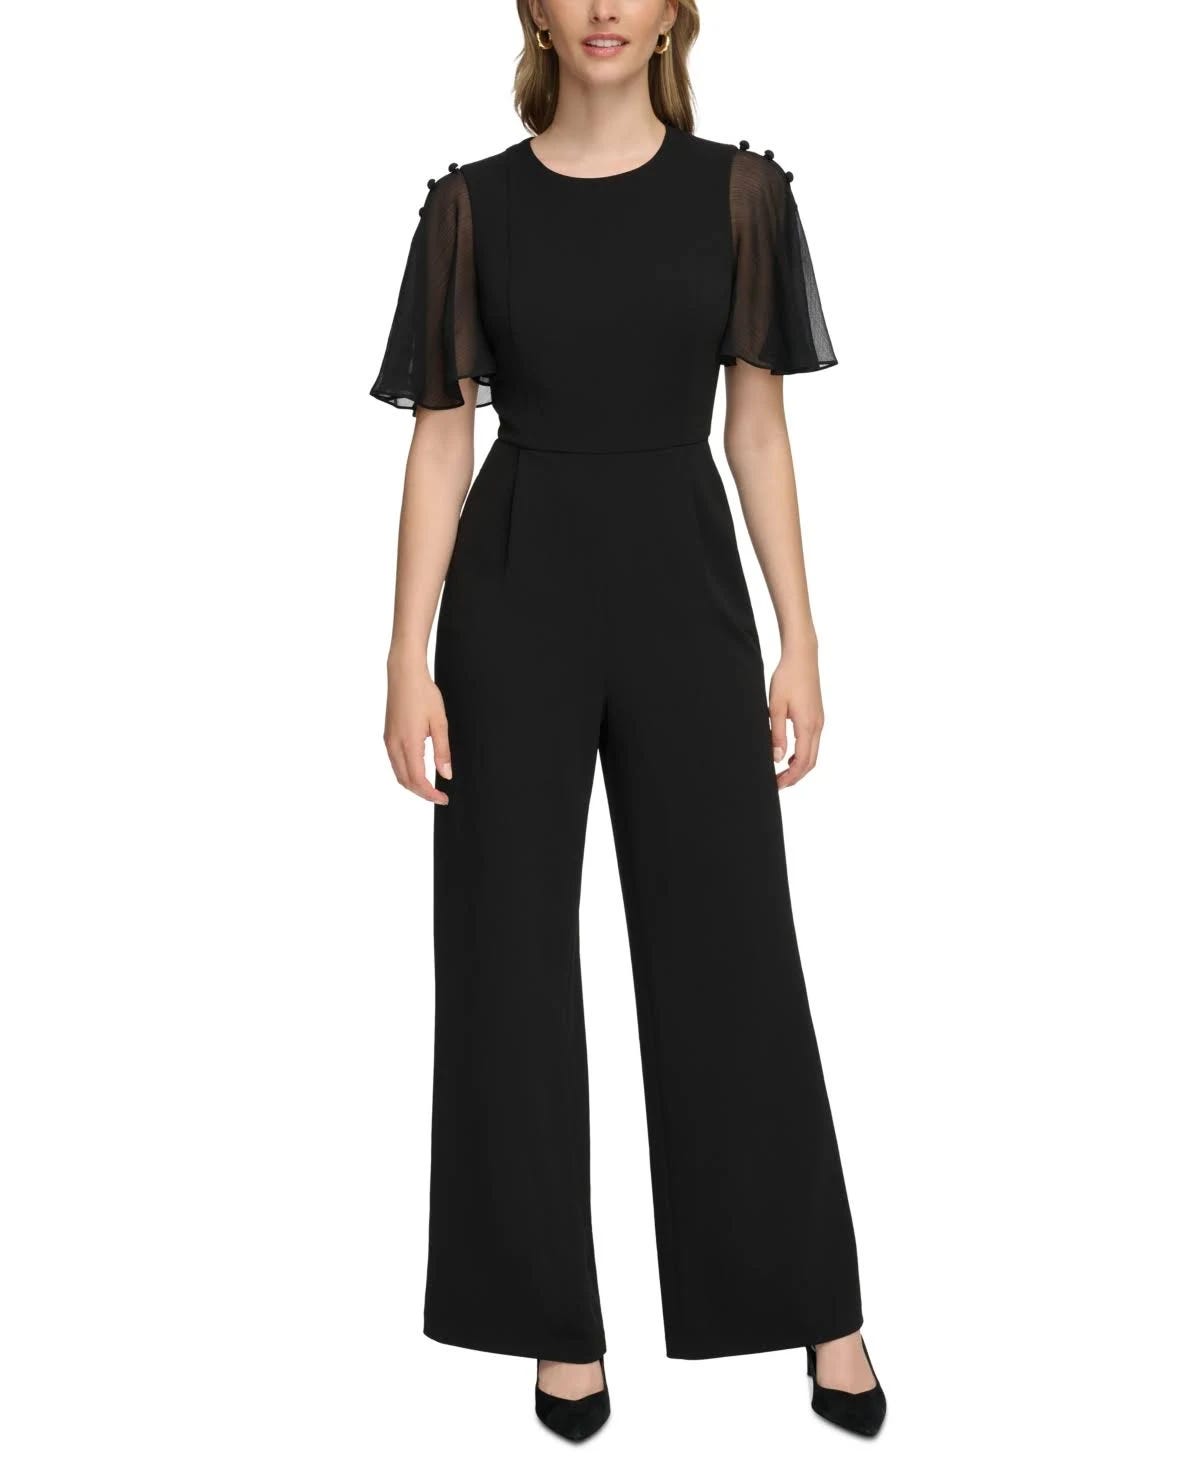 Chic Black Jumpsuit with Flutter Sleeves by Calvin Klein | Image